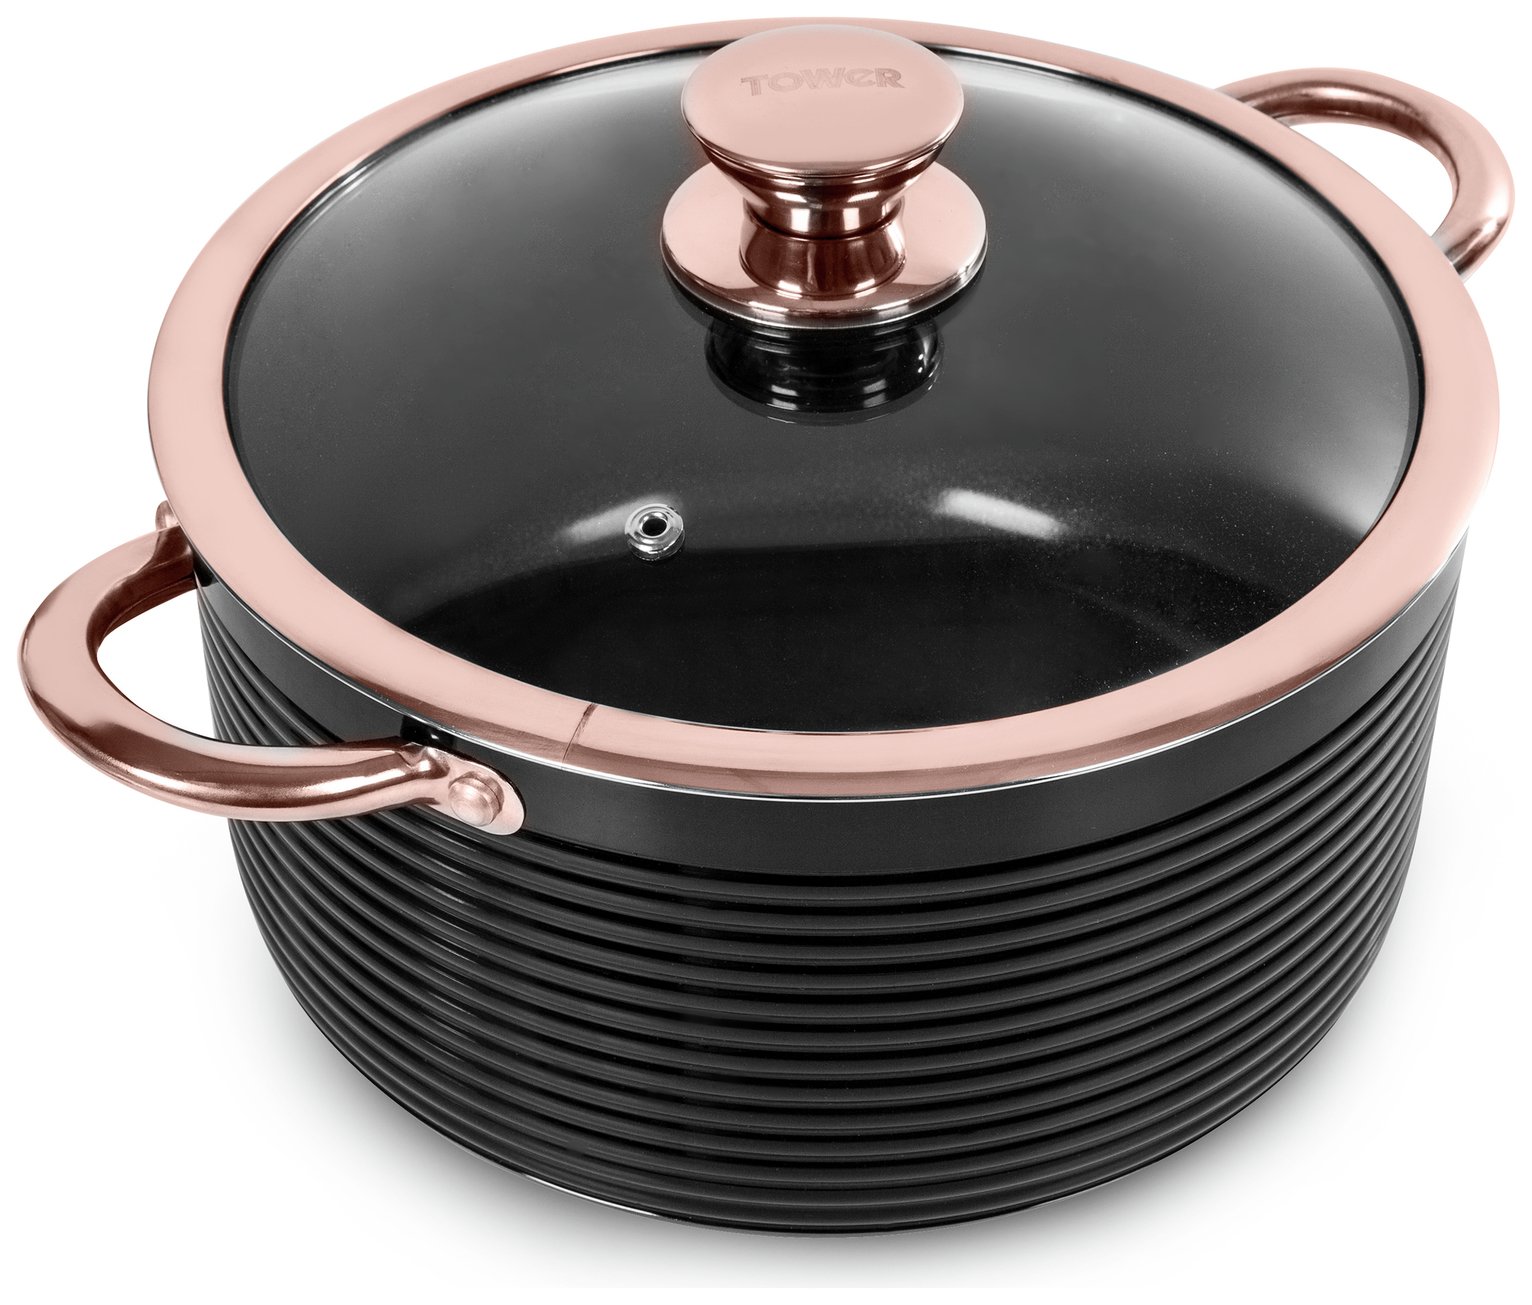 Tower Linear 24cm Casserole Dish - Black and Rose Gold